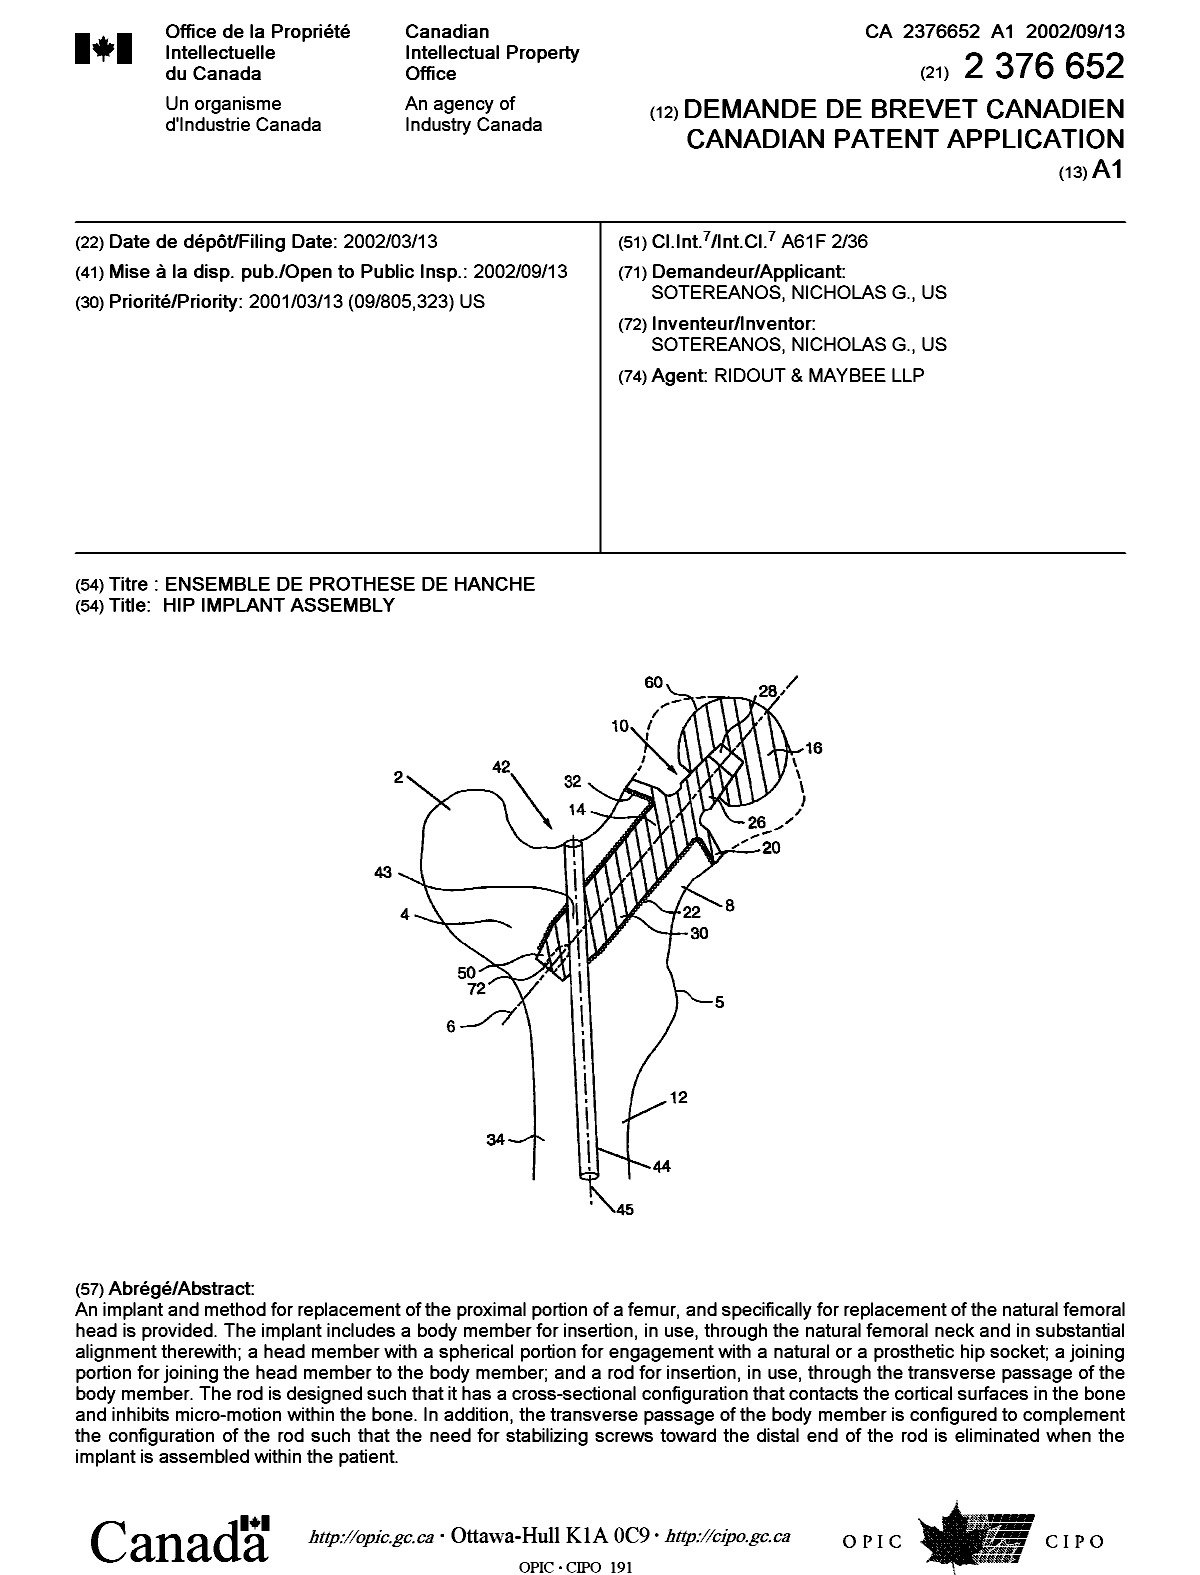 Canadian Patent Document 2376652. Cover Page 20020823. Image 1 of 1